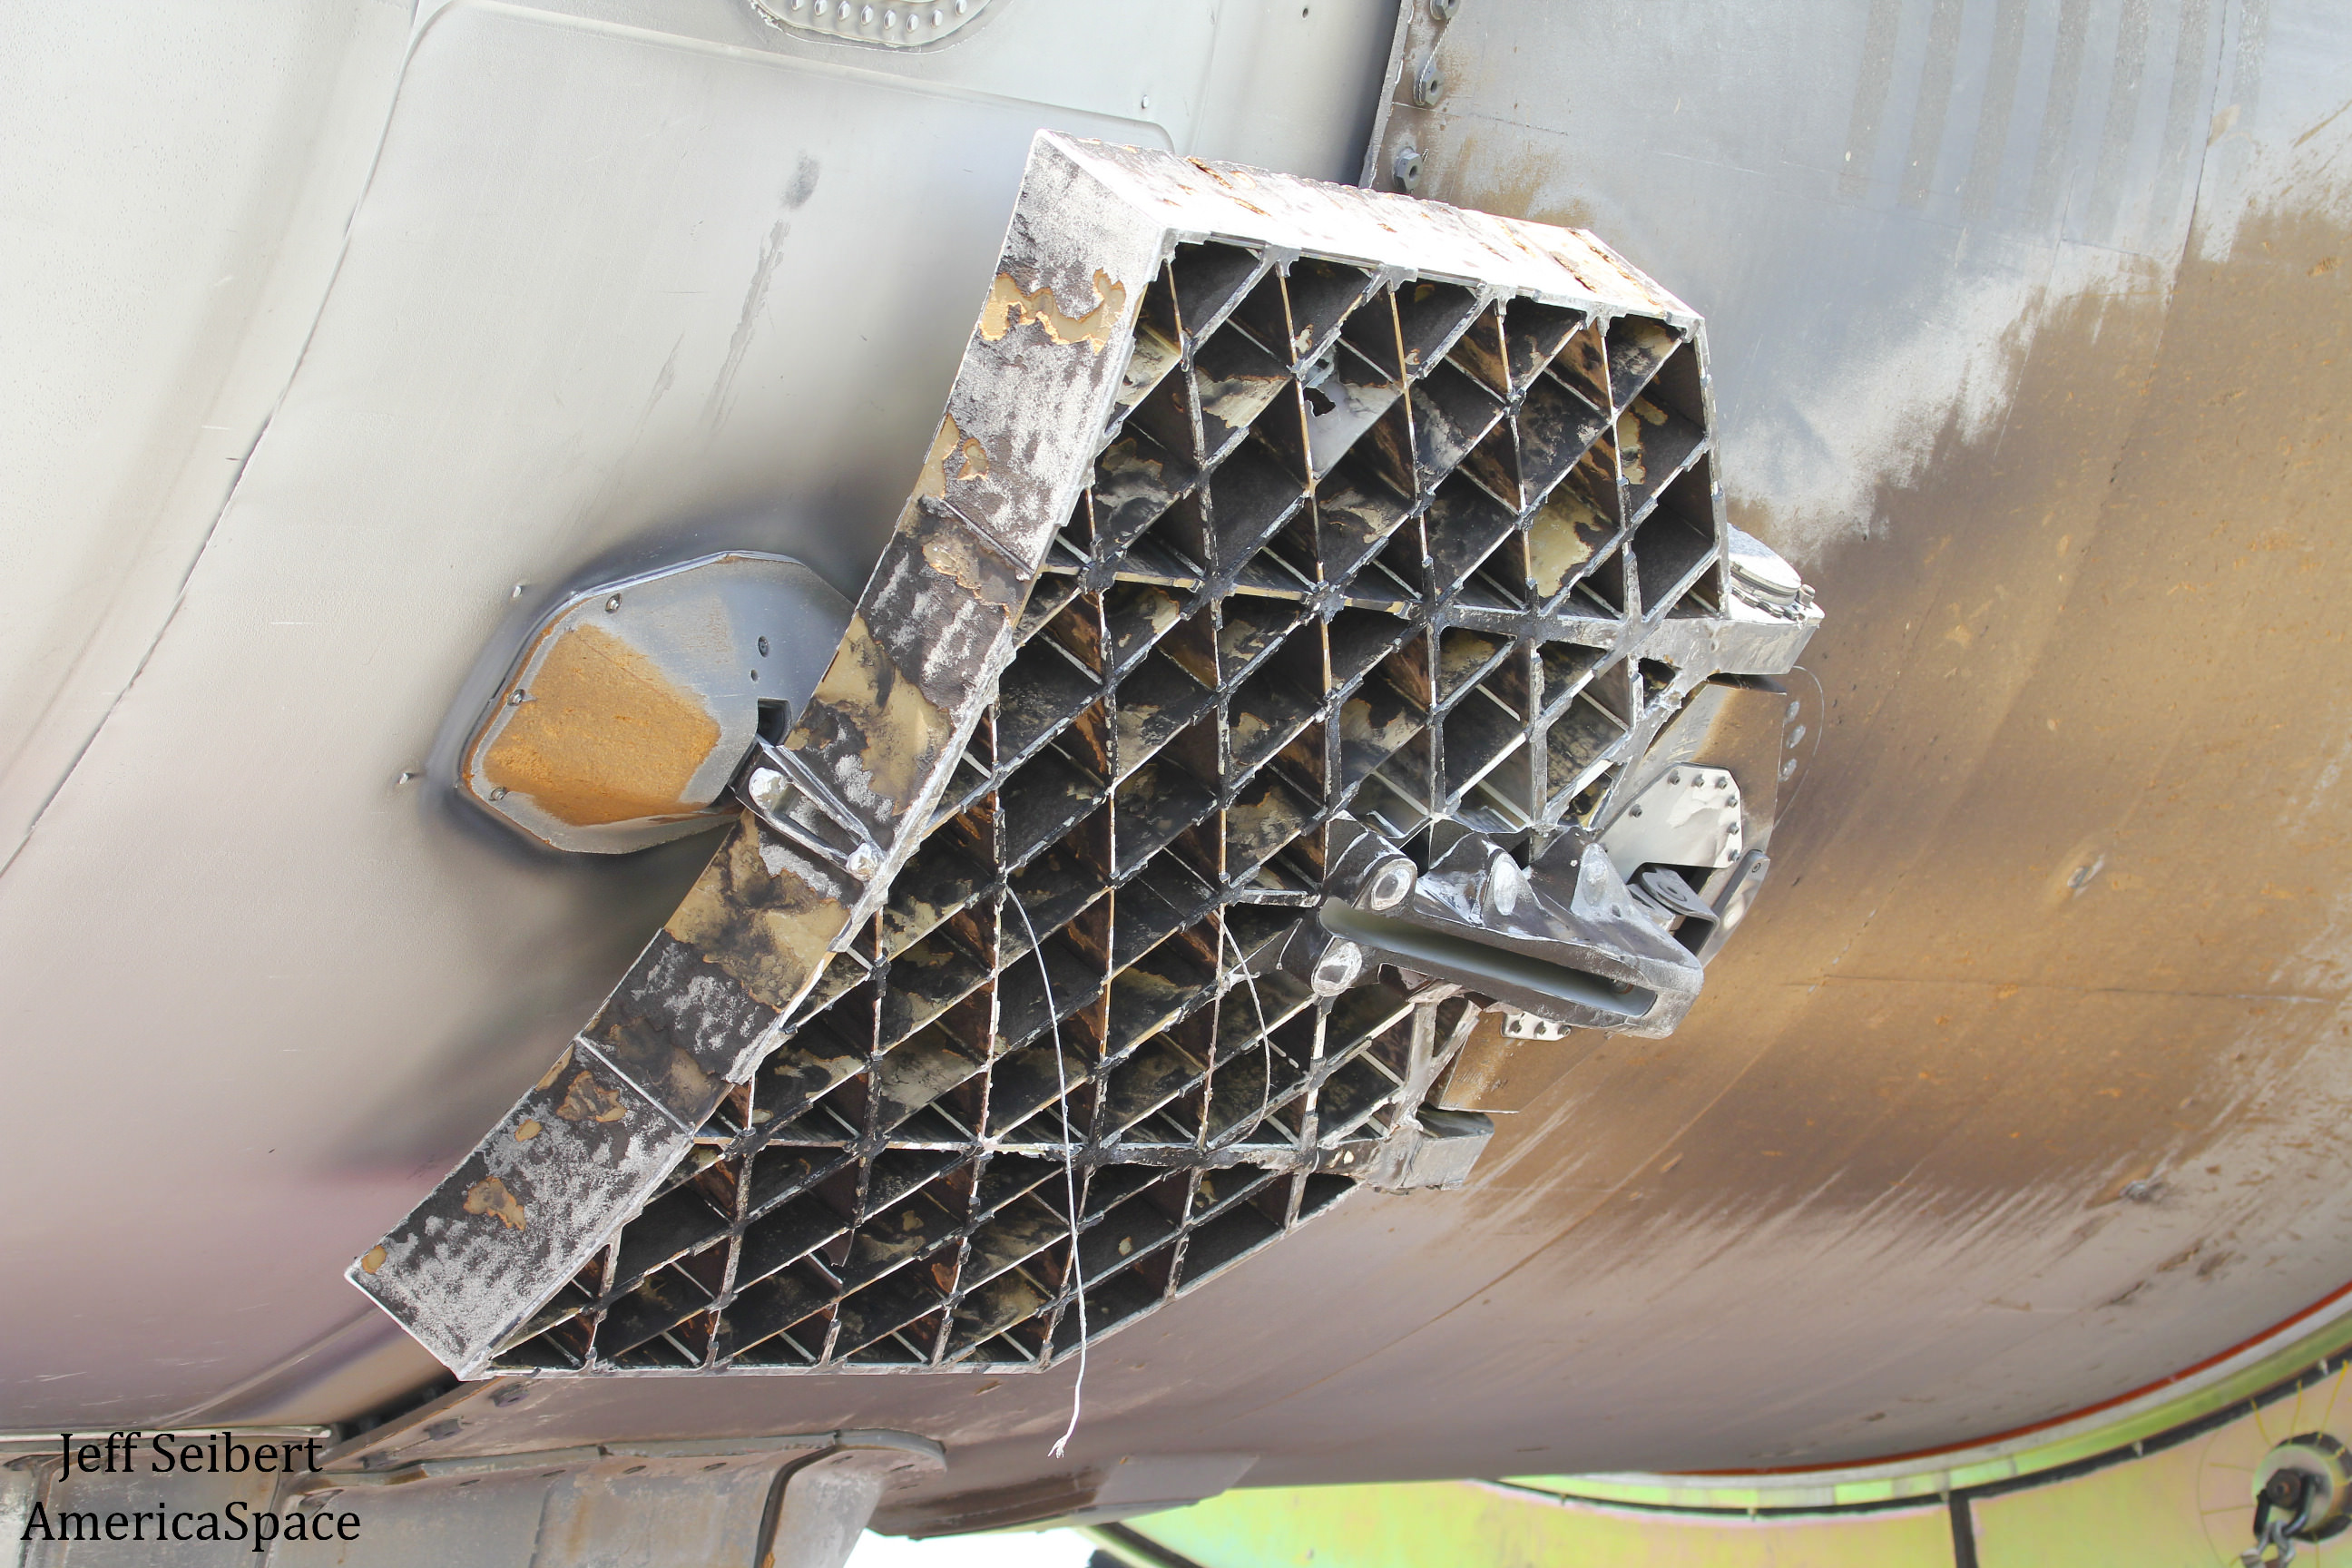 Up close look at grid fins from recovered first stage booster after SpaceX JCSAT-14 launch during transport to SpaceX hangar at pad 39A at the Kennedy Space Center, Florida. Credit: Jeff Seibert/AmericaSpace